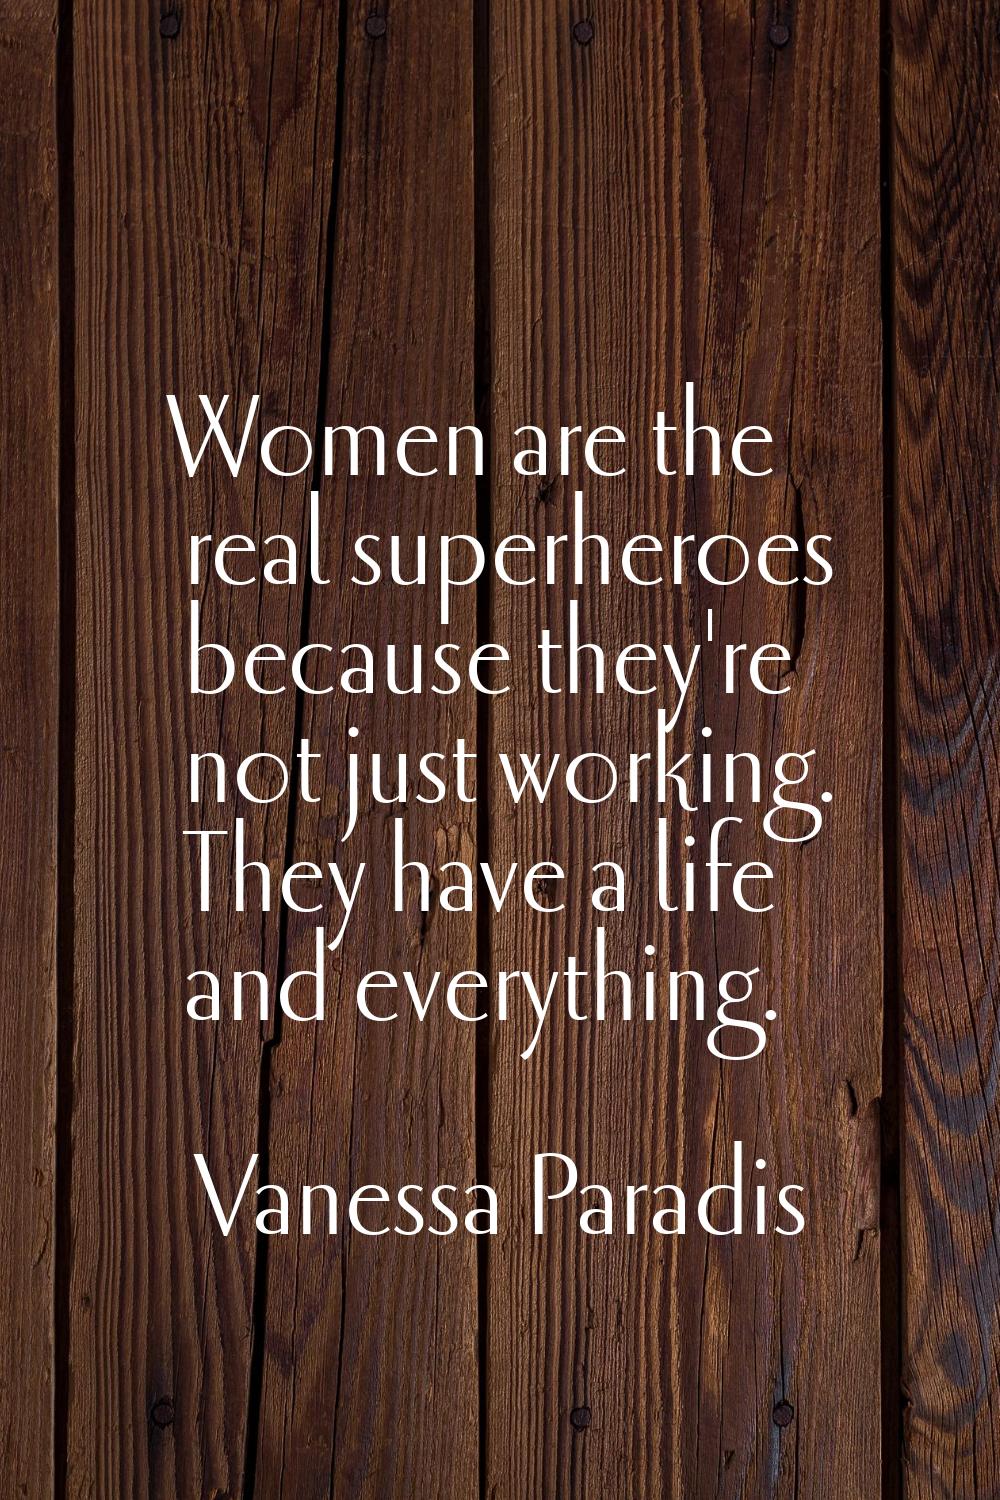 Women are the real superheroes because they're not just working. They have a life and everything.